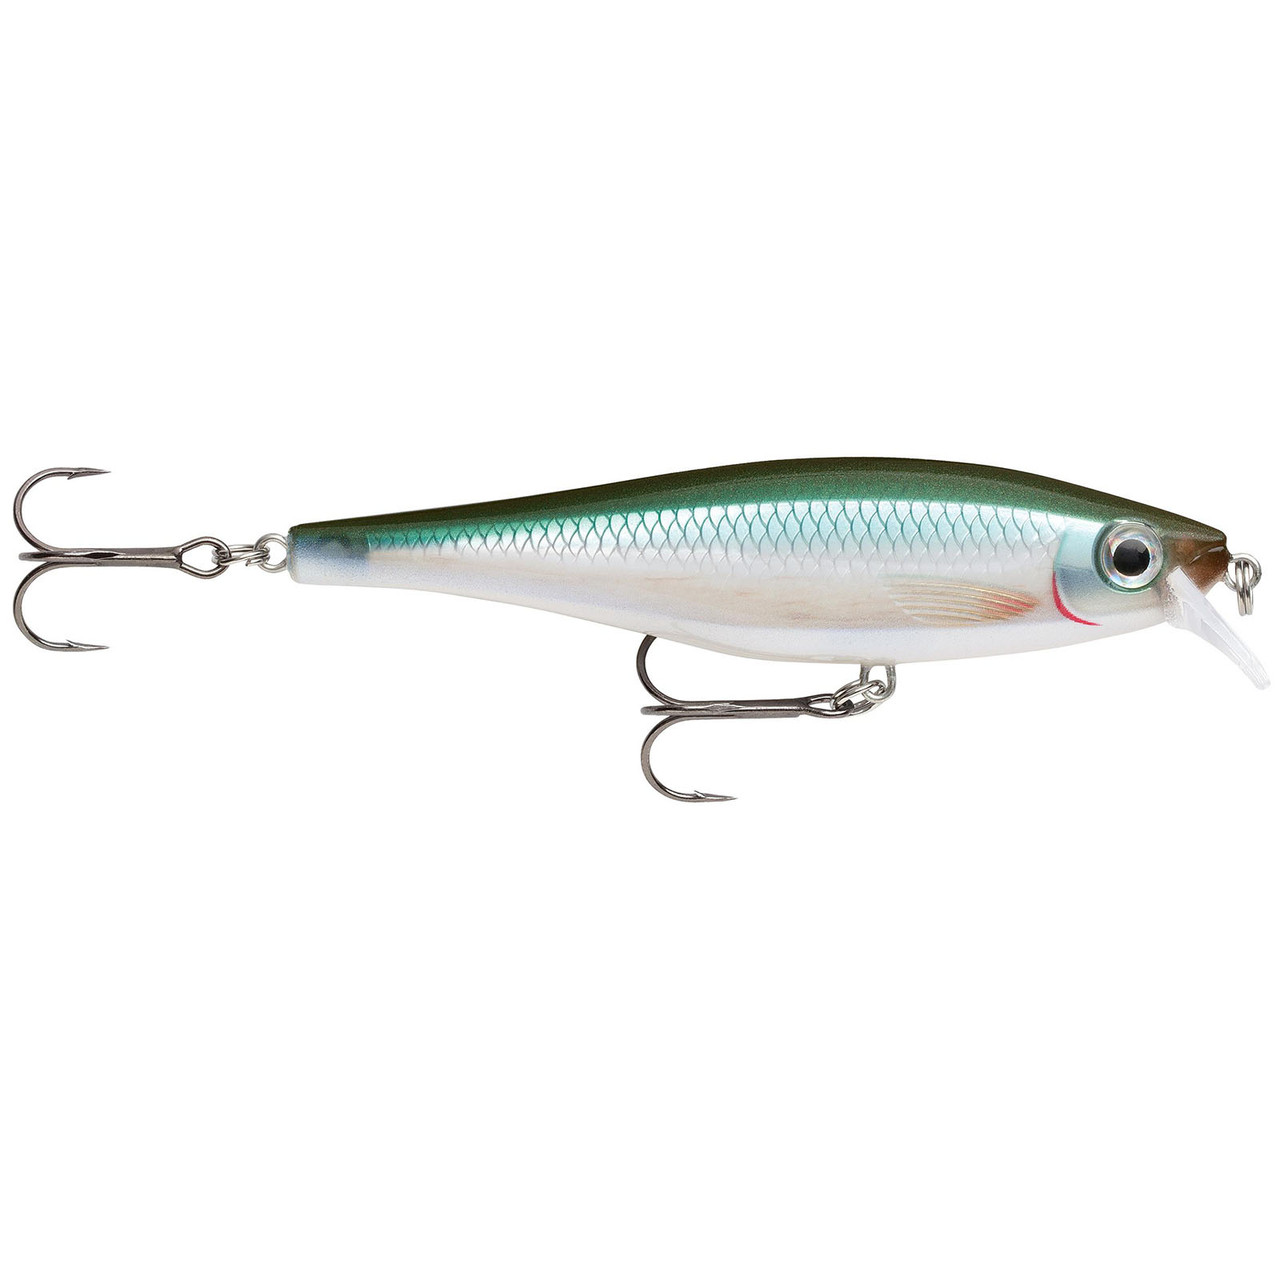  Balsa Xtreme Jointed Minnow 09 Blue Back Herring : General  Sporting Equipment : Sports & Outdoors